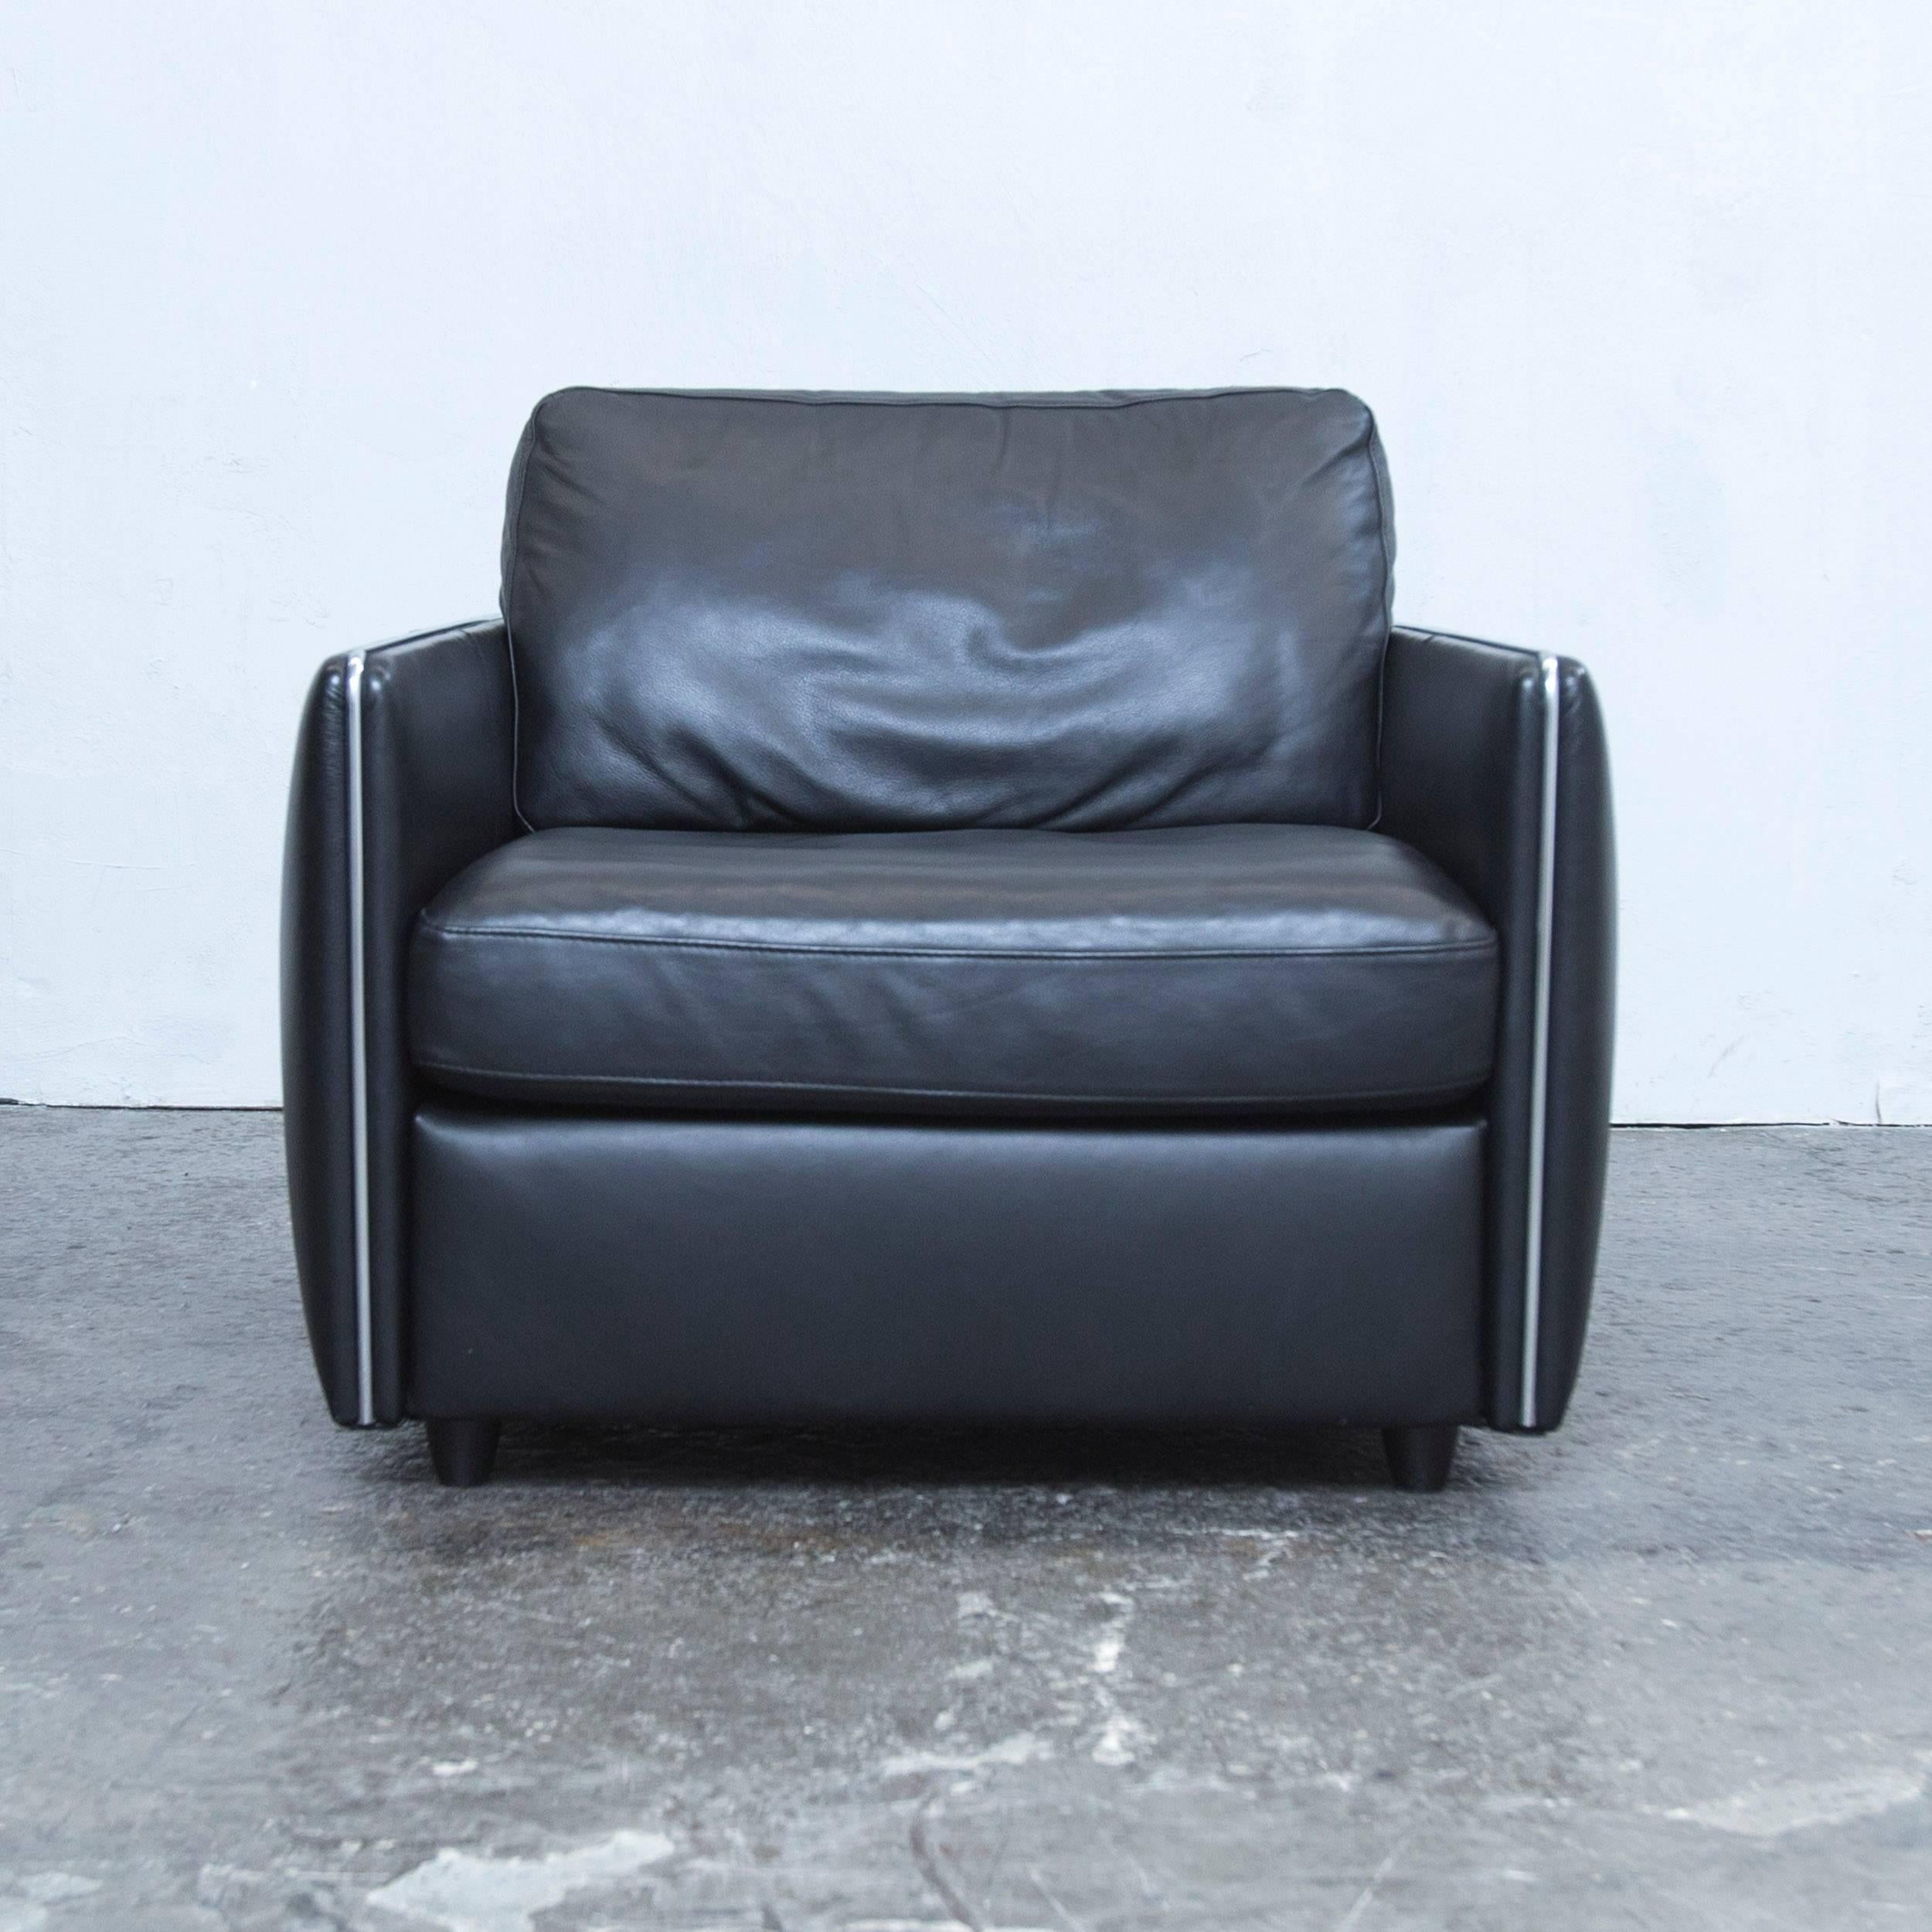 Black colored original Musterring leather armchair in a modern and minimalistic style, made for pure comfort.